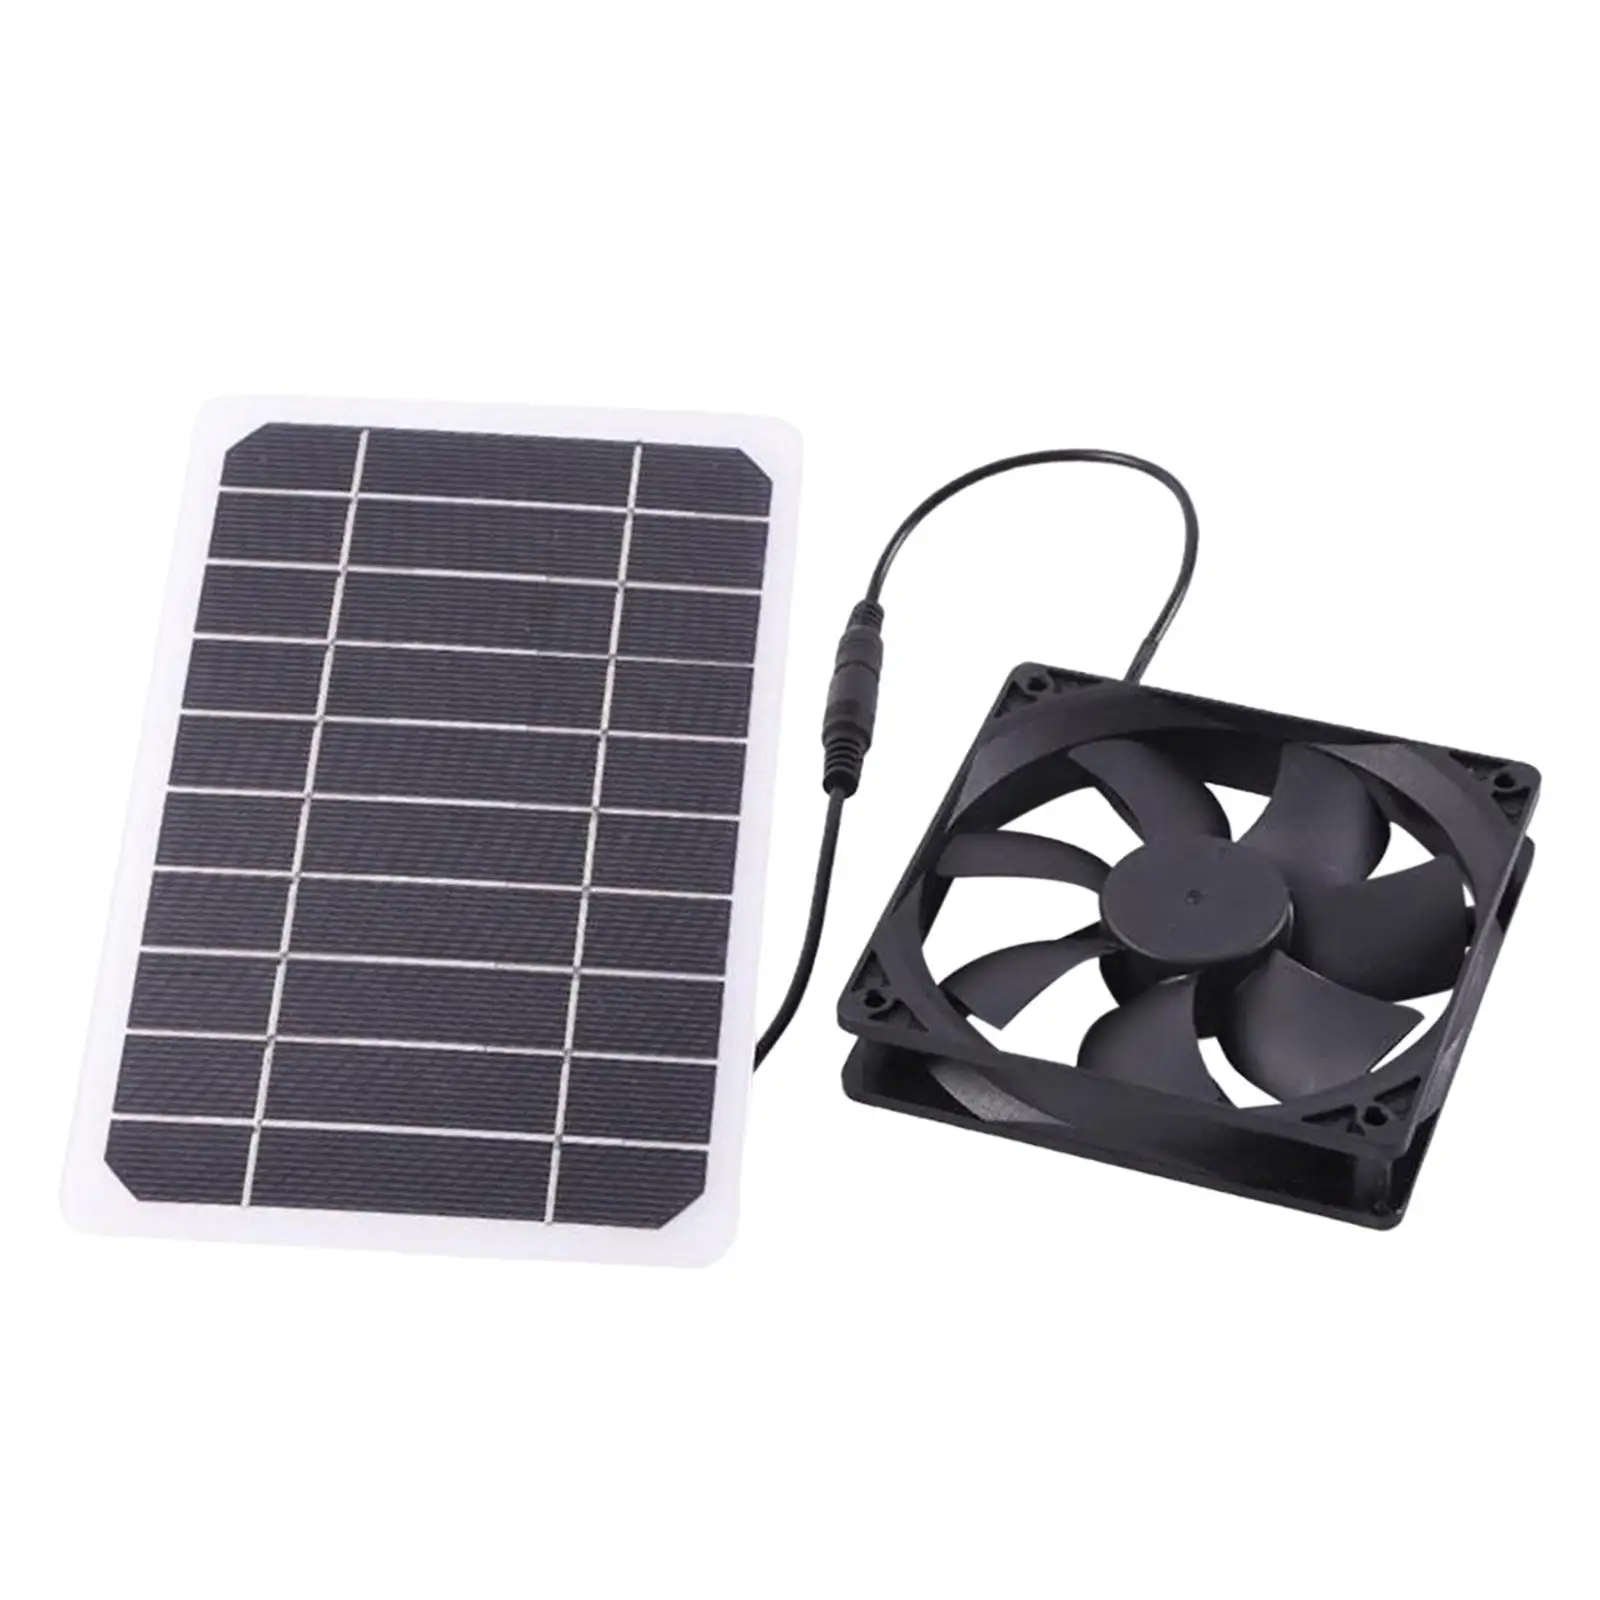 Outdoor Solar Powered Panel Fan Solar Powered Fan Cooling Ventilation for Chicken Coop Pet Houses Camping Greenhouse RV Roof